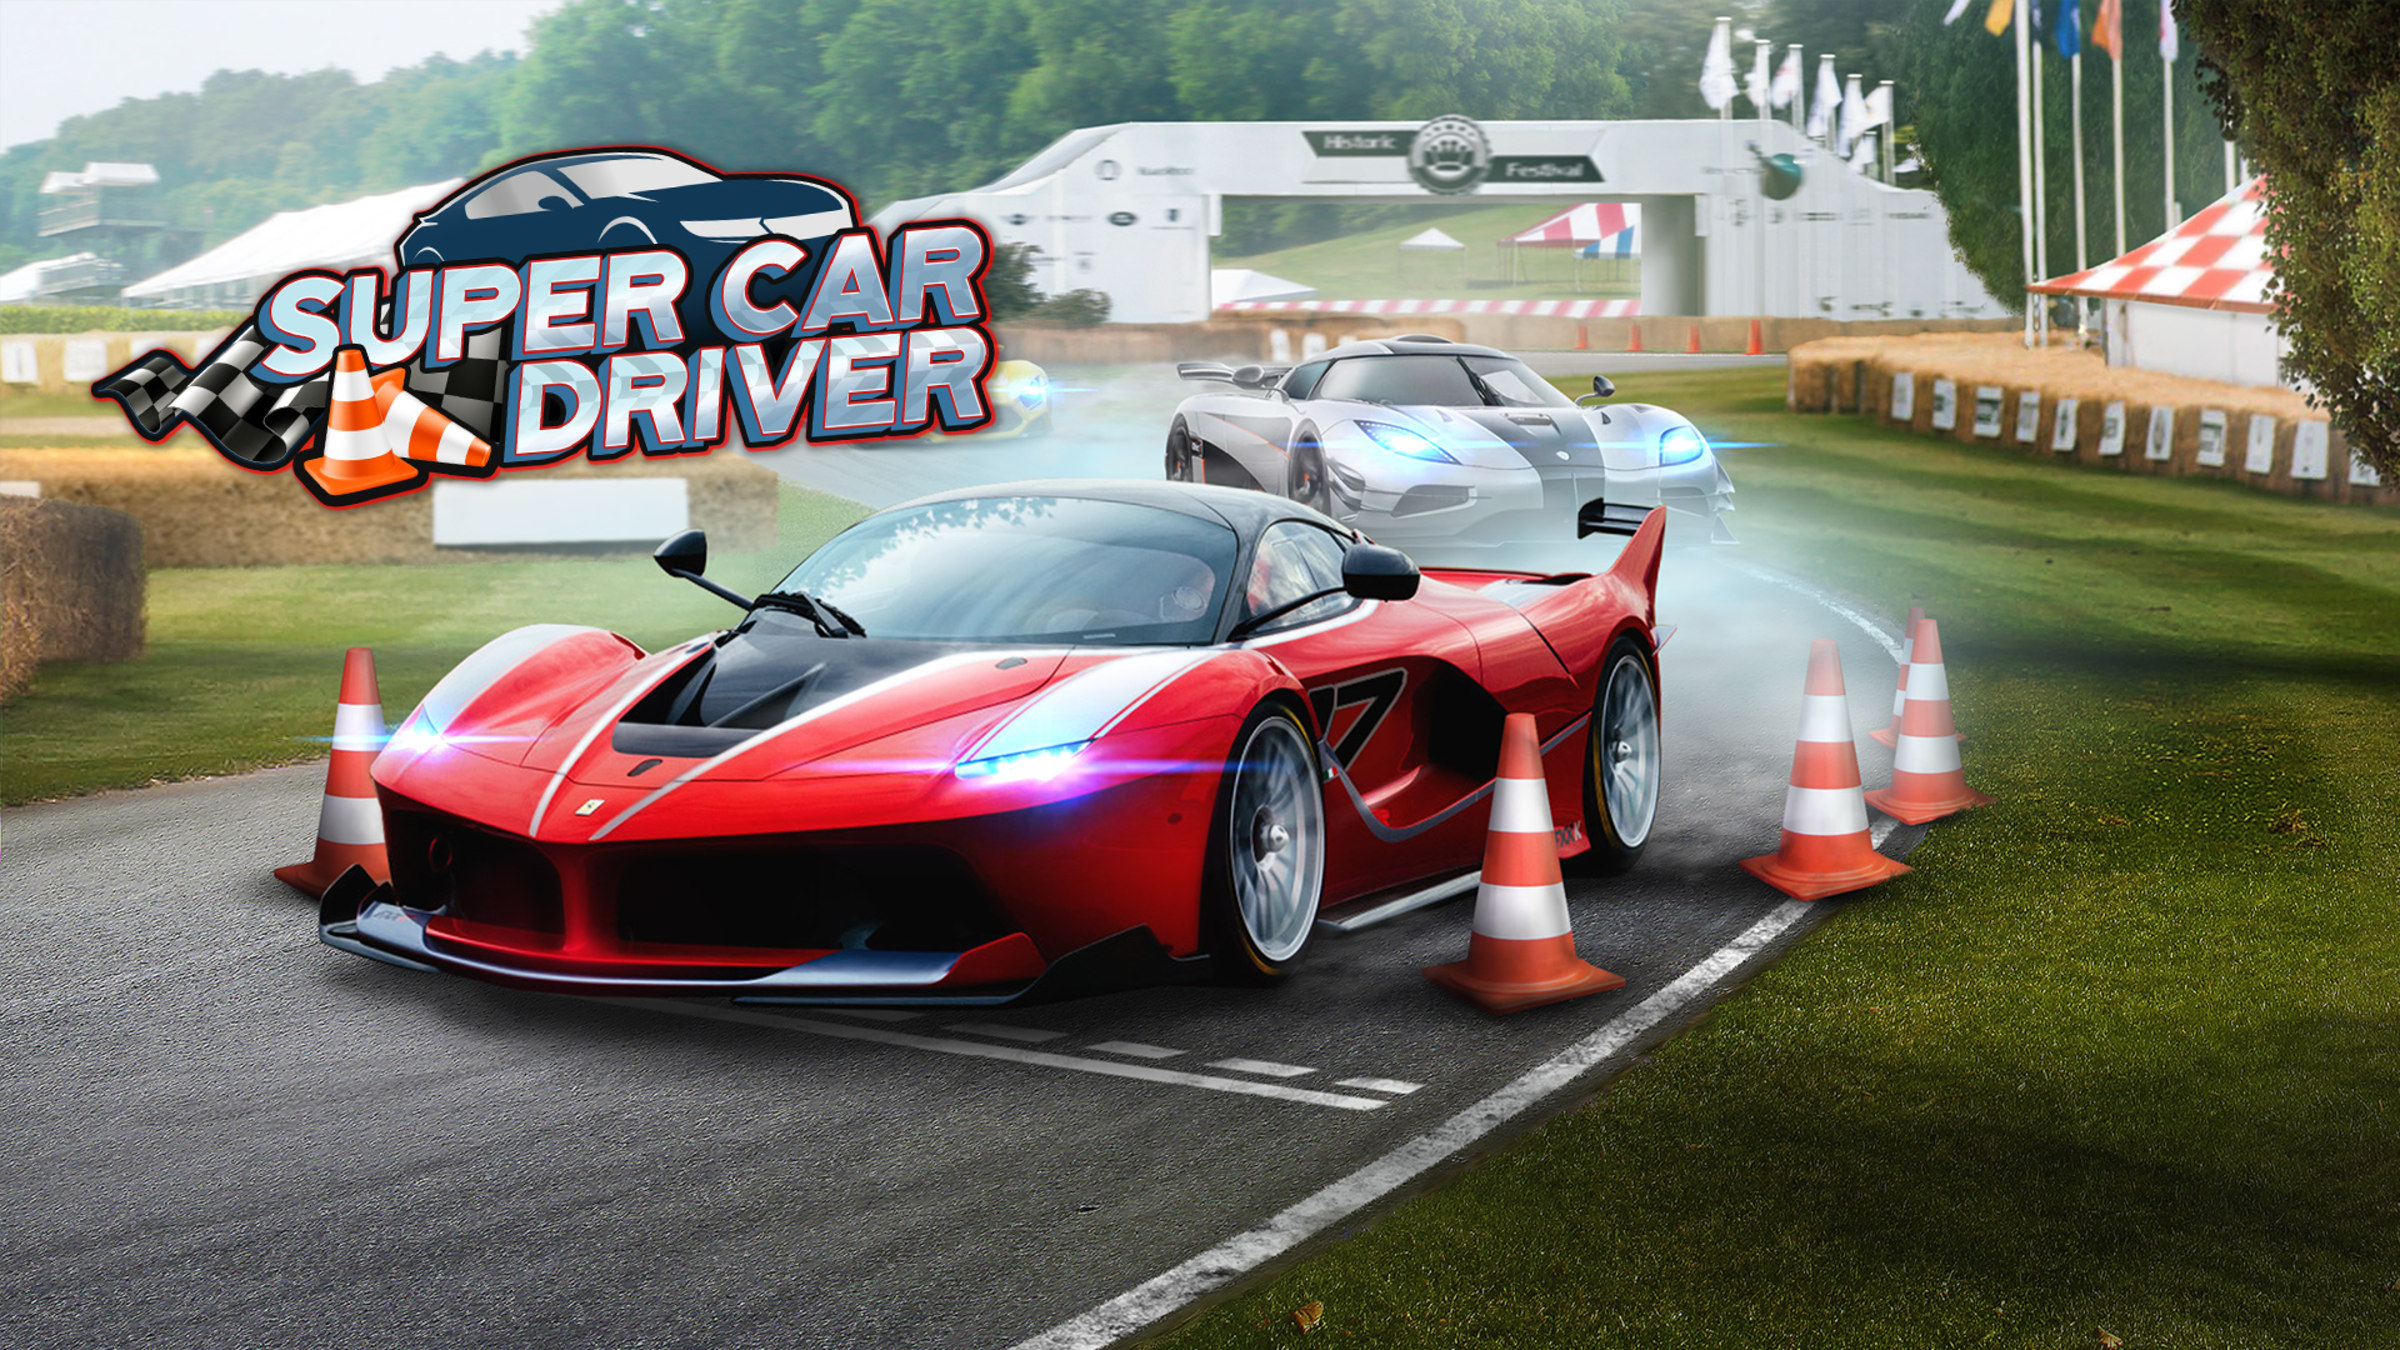 Super car Driving game. Нинтендо кар. Cars Video game super Driver.